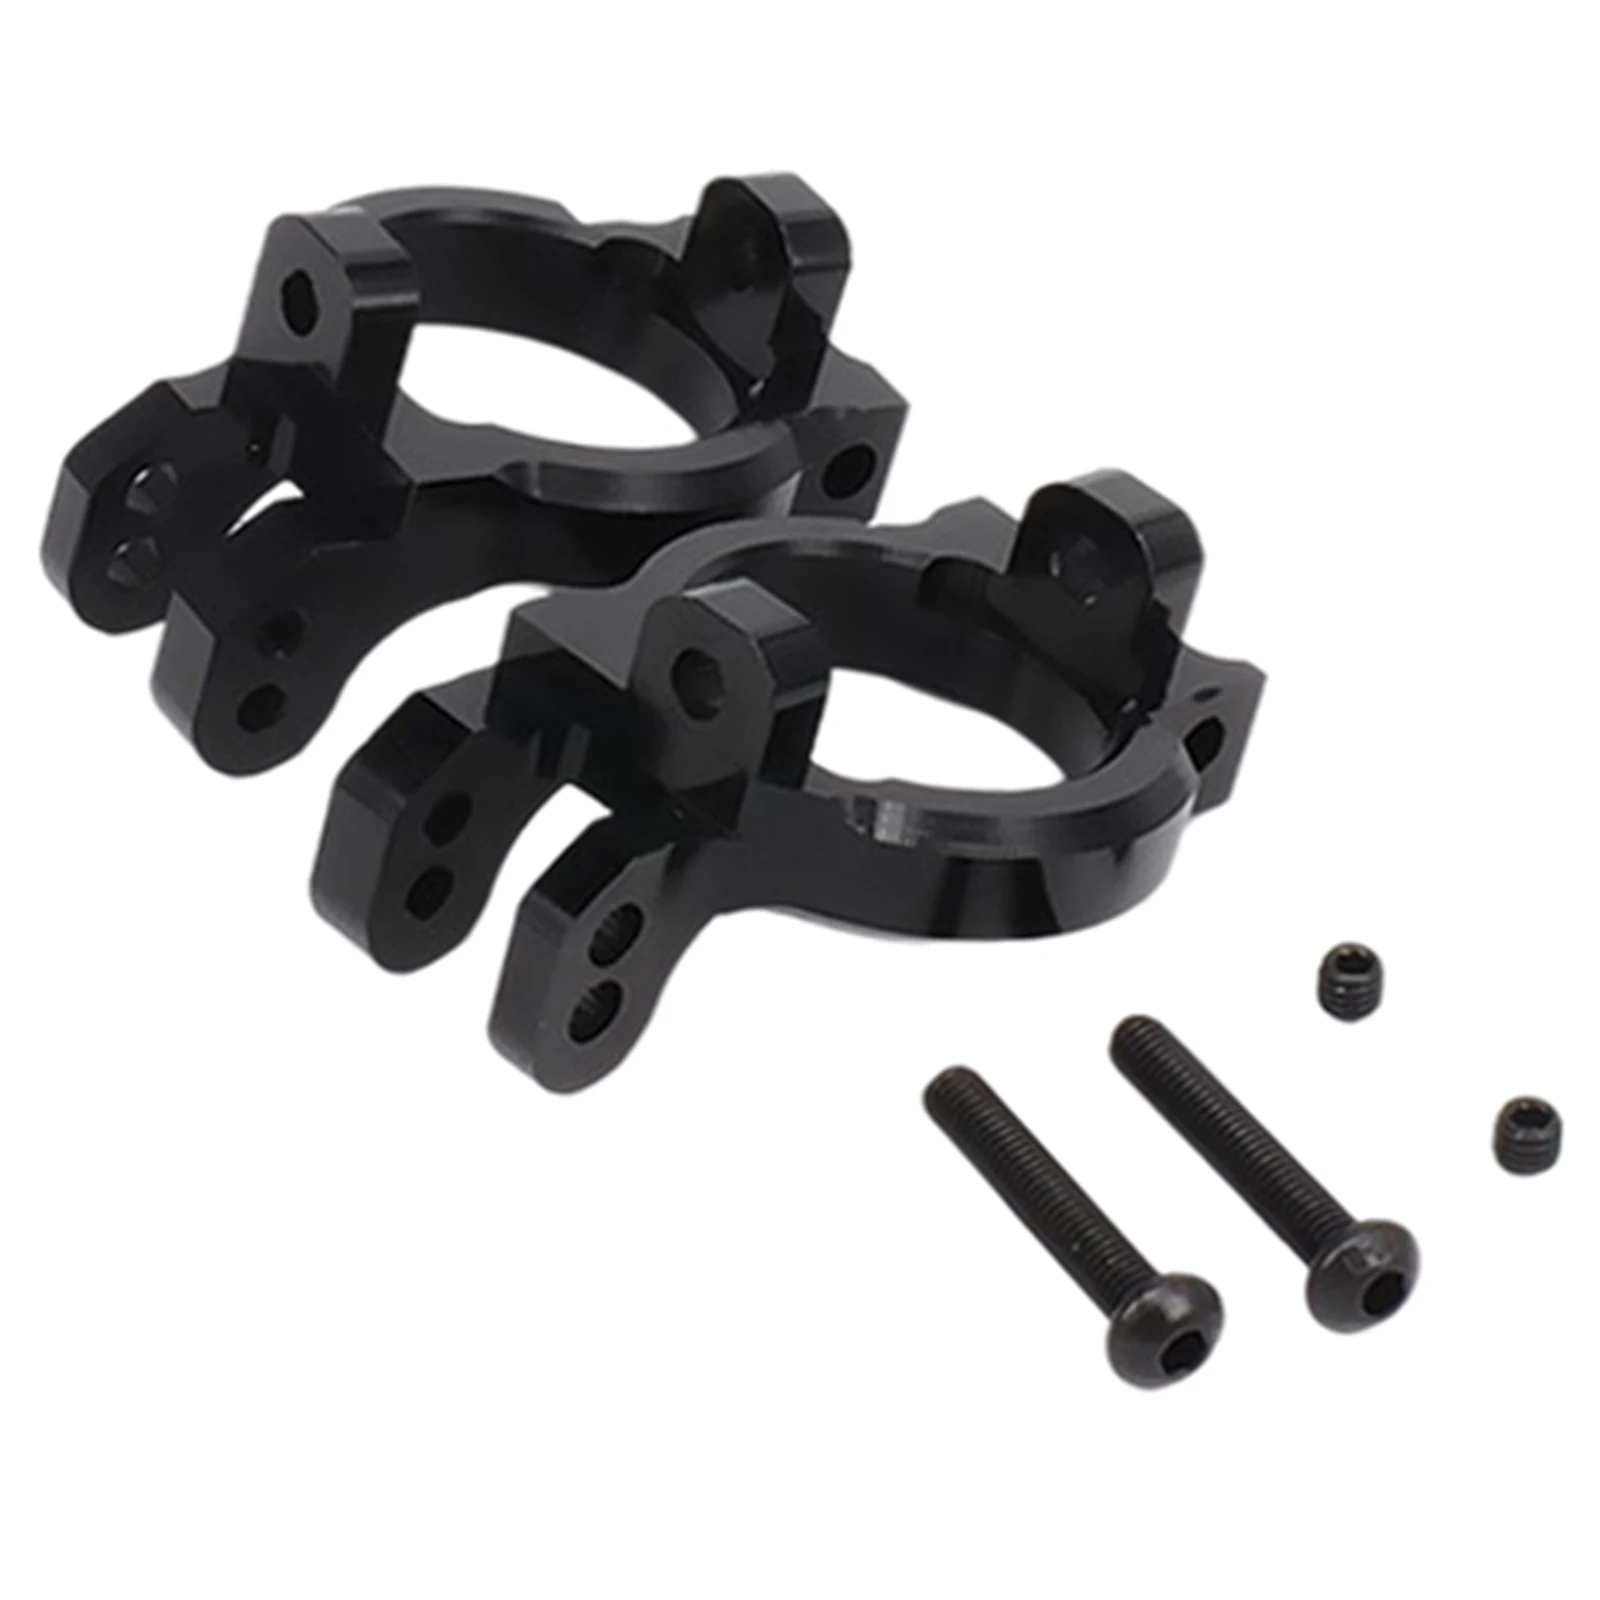 Upgrade Aluminum Alloy RC C Hub Carrier Steering Knuckle Arm Carrier Set for Racer 90026 AX31002 Front Knuckle Arm Modified